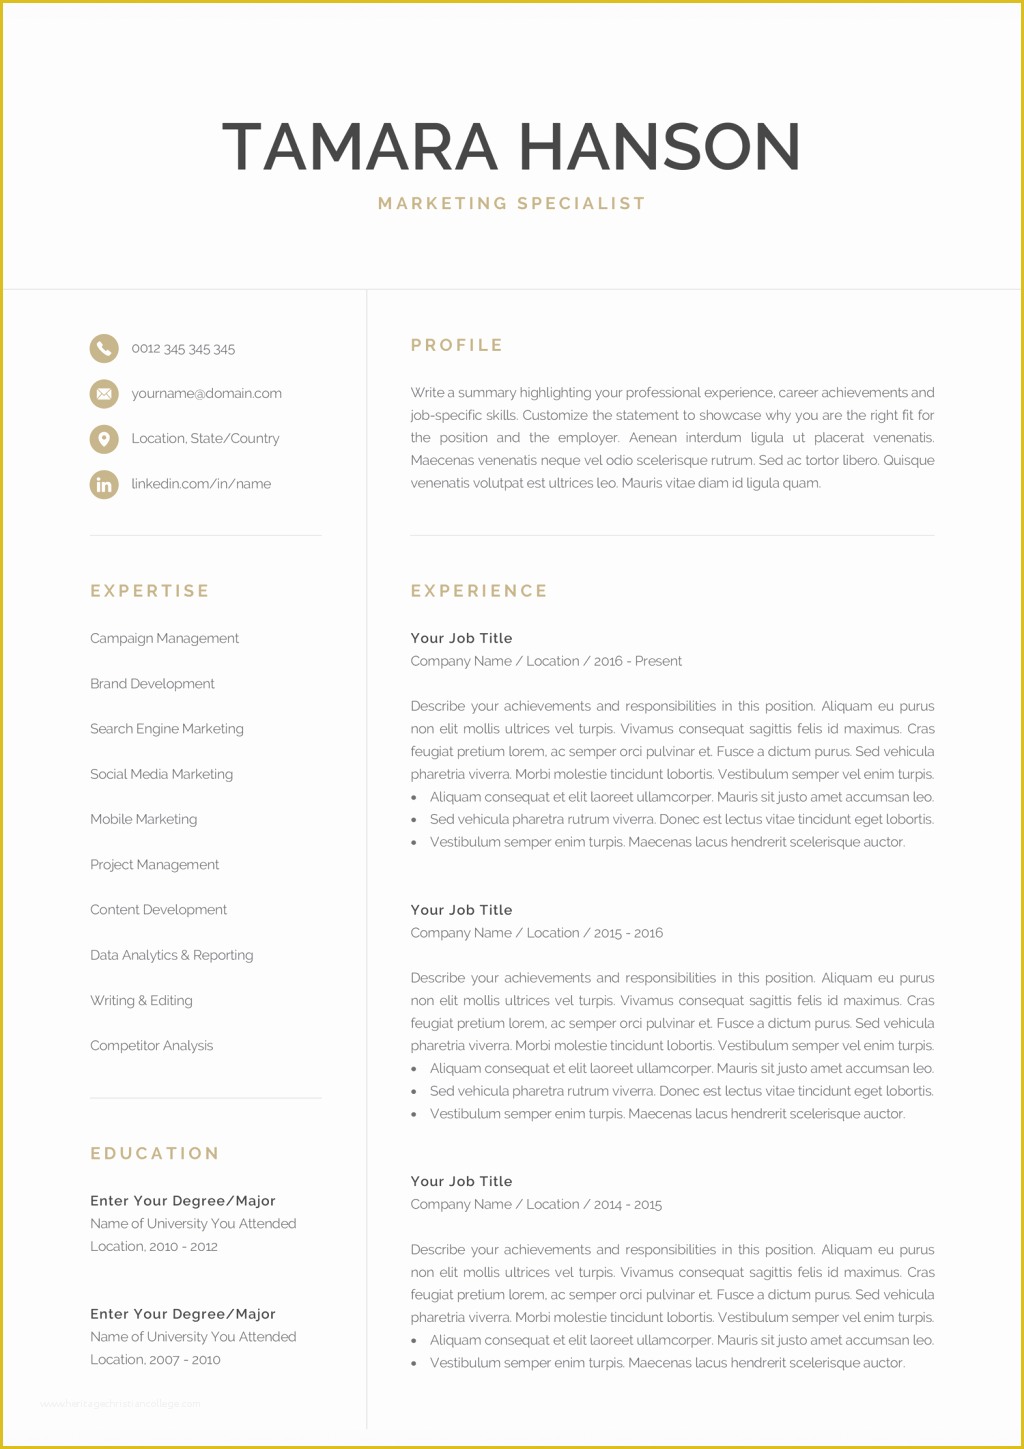 Free Apple Pages Templates Of Free Pages Resume Templates Tag Download Pages Resume